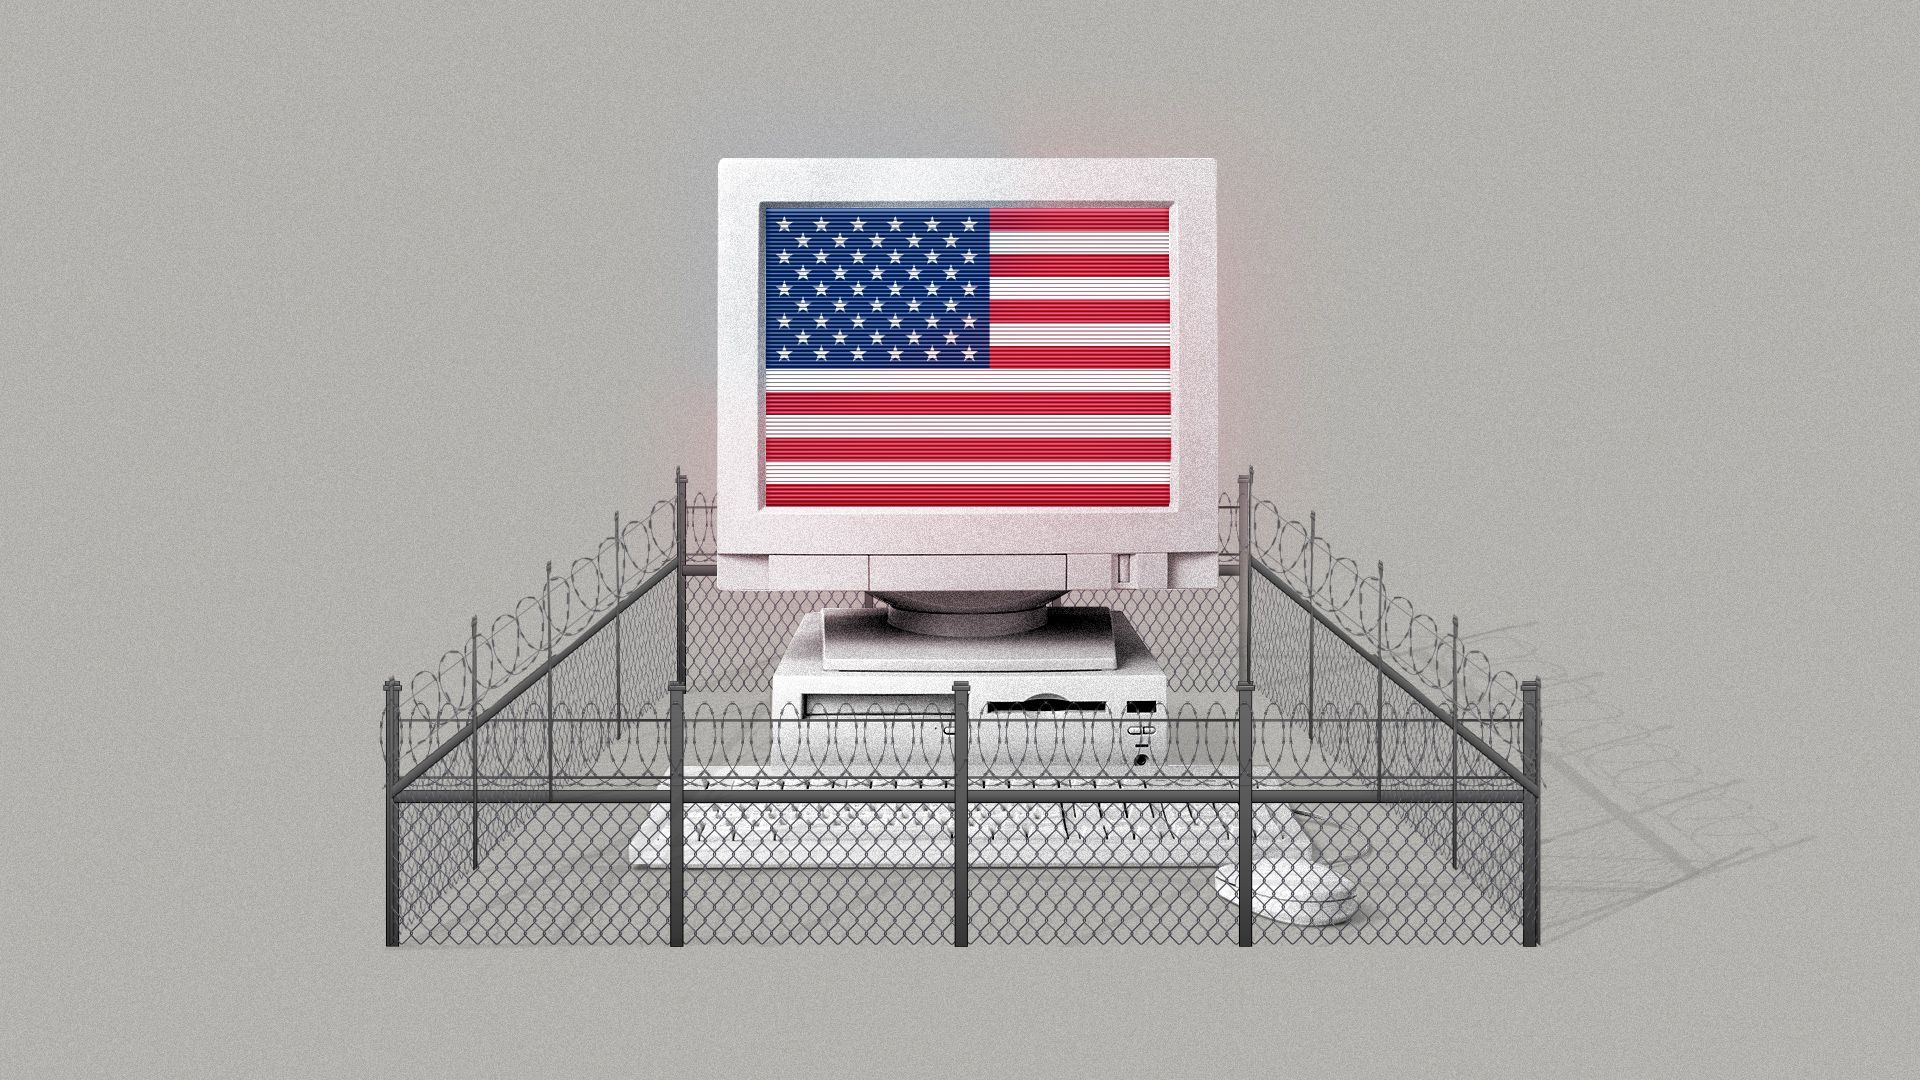 Illustration of a computer with an American flag on the screen surrounded by barbed wire. 